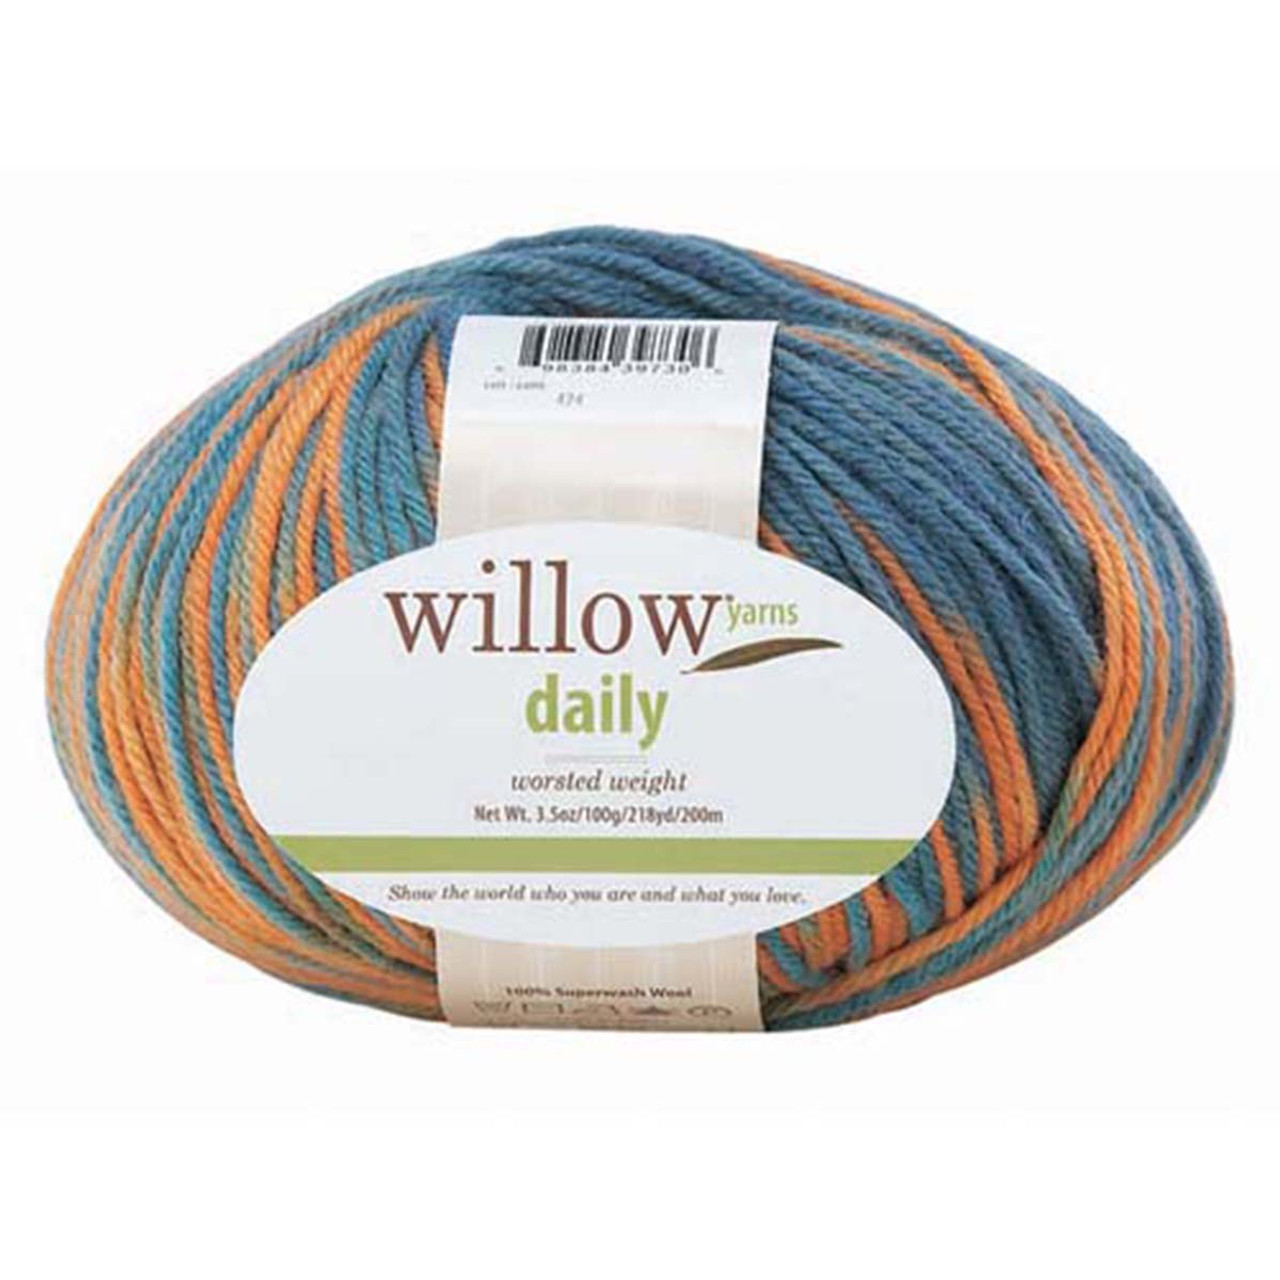 Willow Yarns Daily Worsted-Bag of 5 Yarn Pack - Herrschners